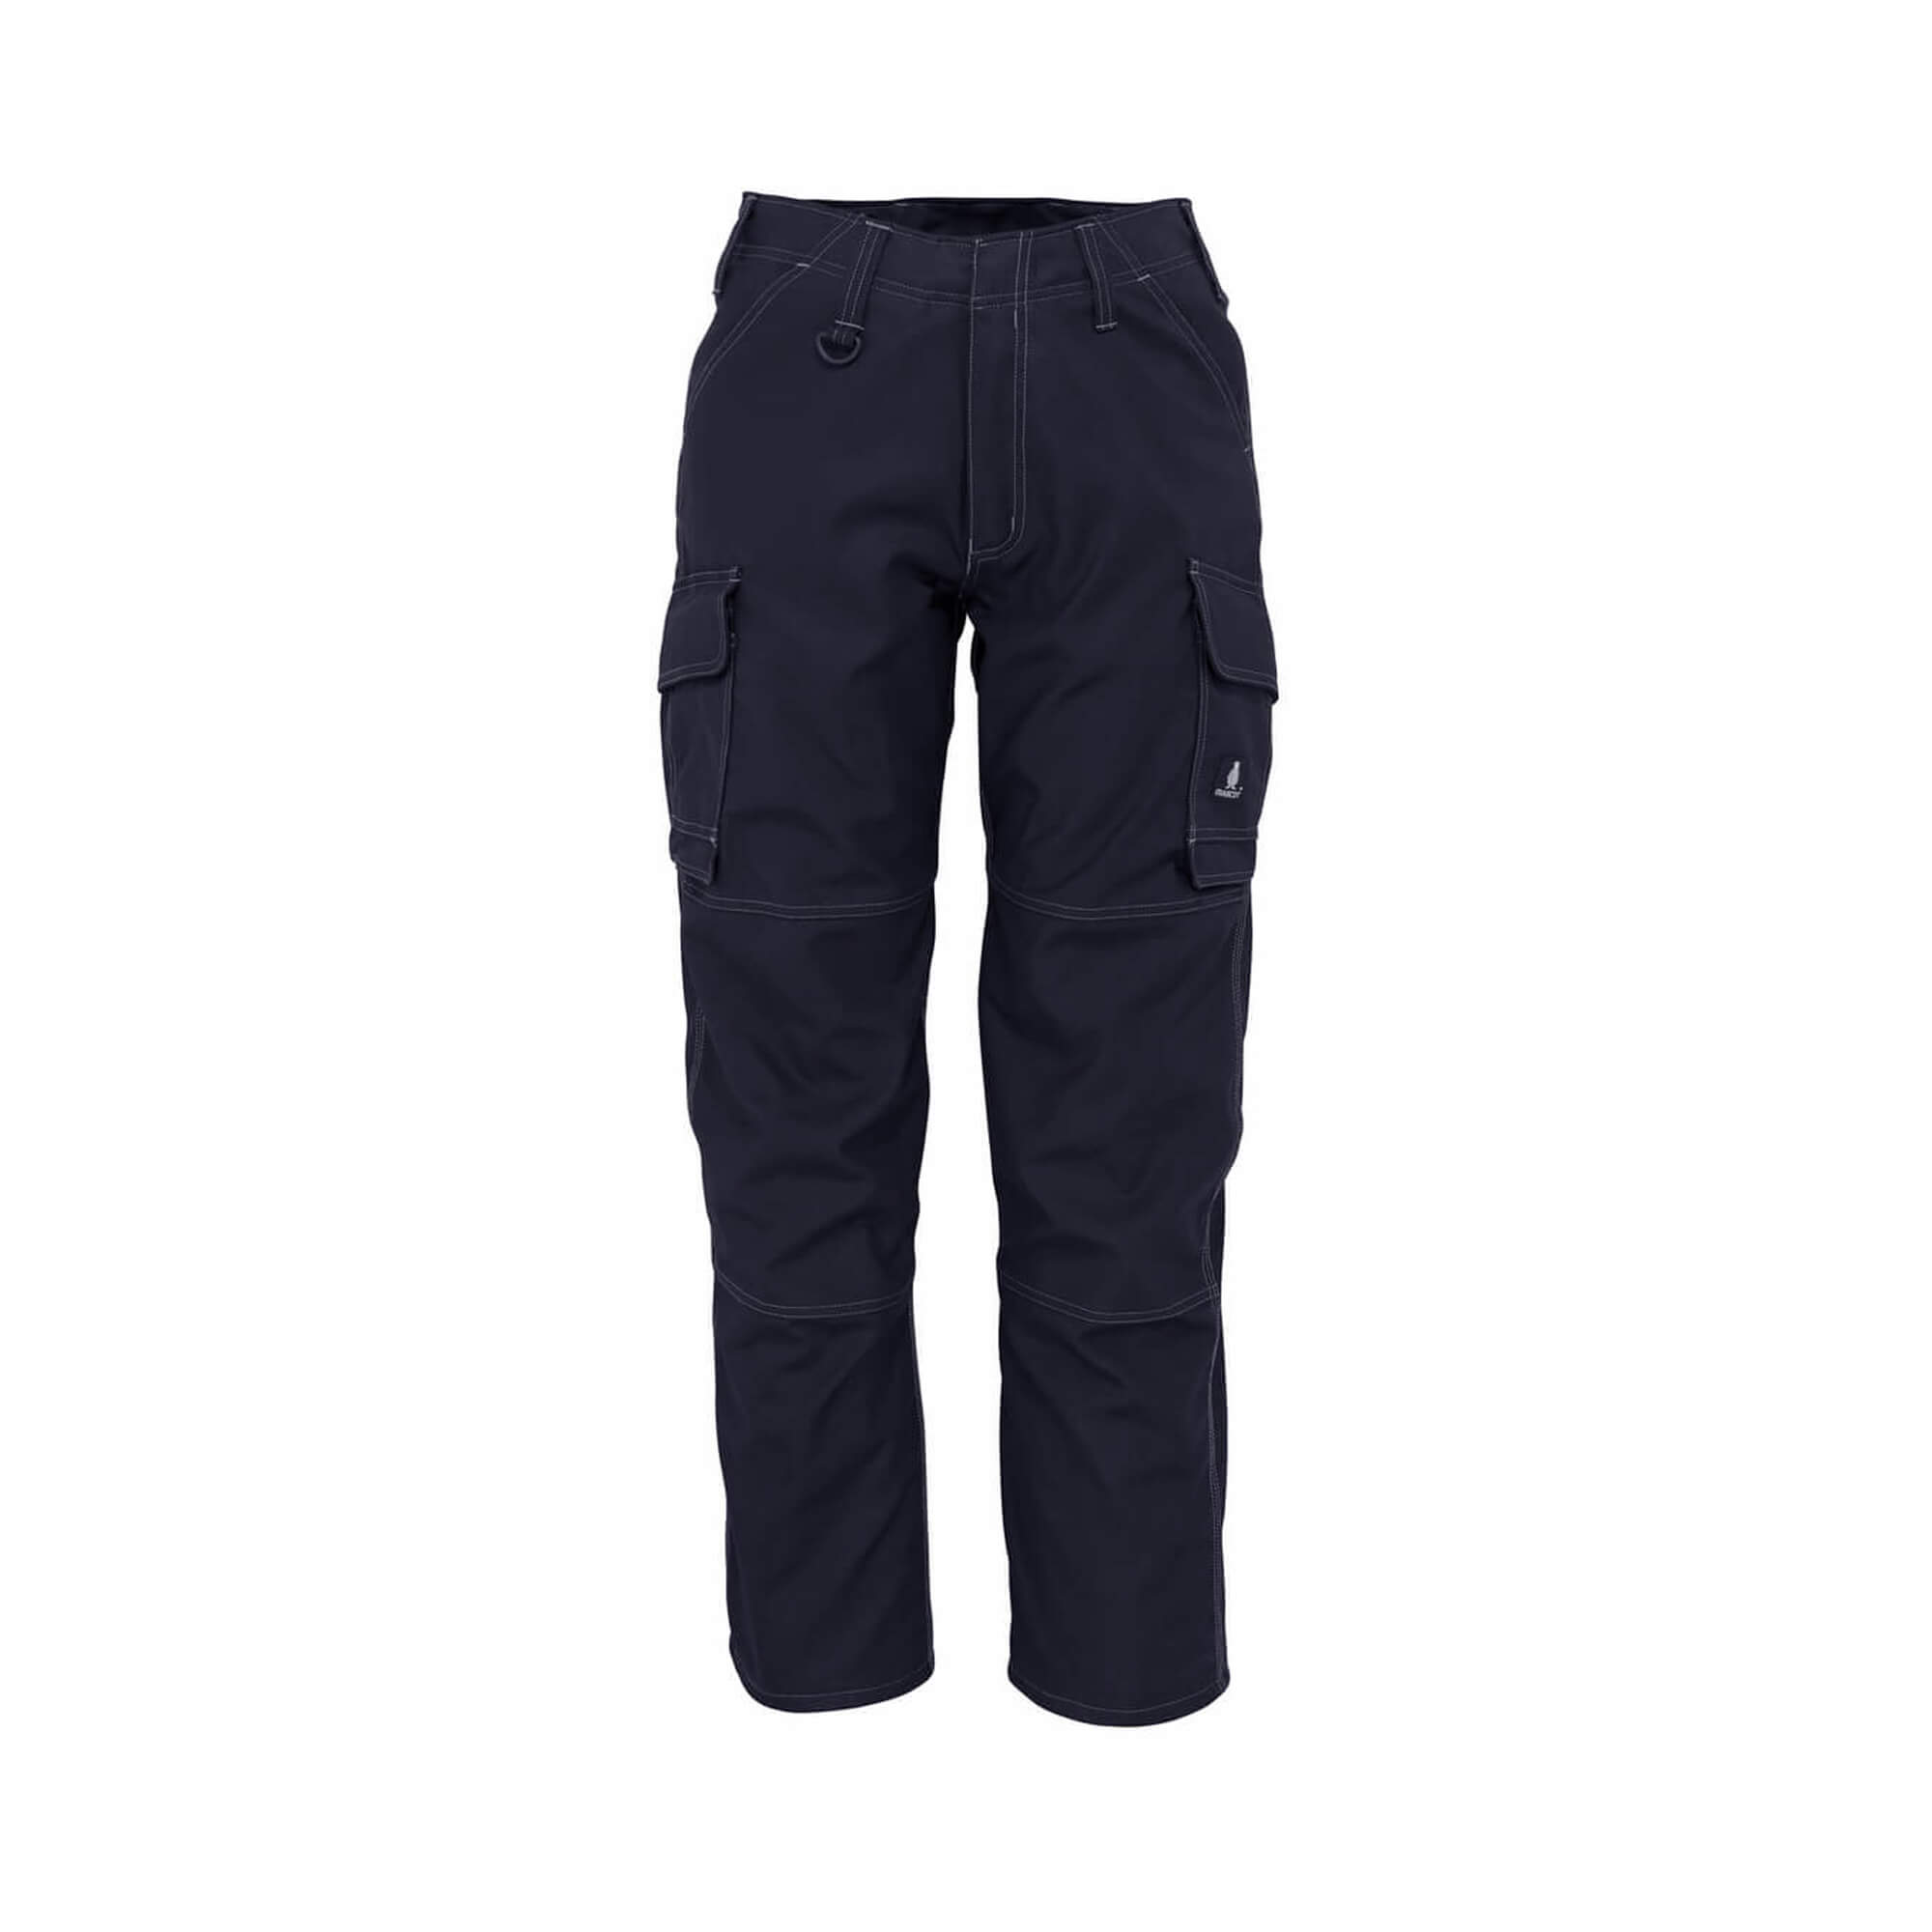 Mascot Workwear 22379 Customized Trousers with kneepad pockets  Clothing  from MI Supplies Limited UK